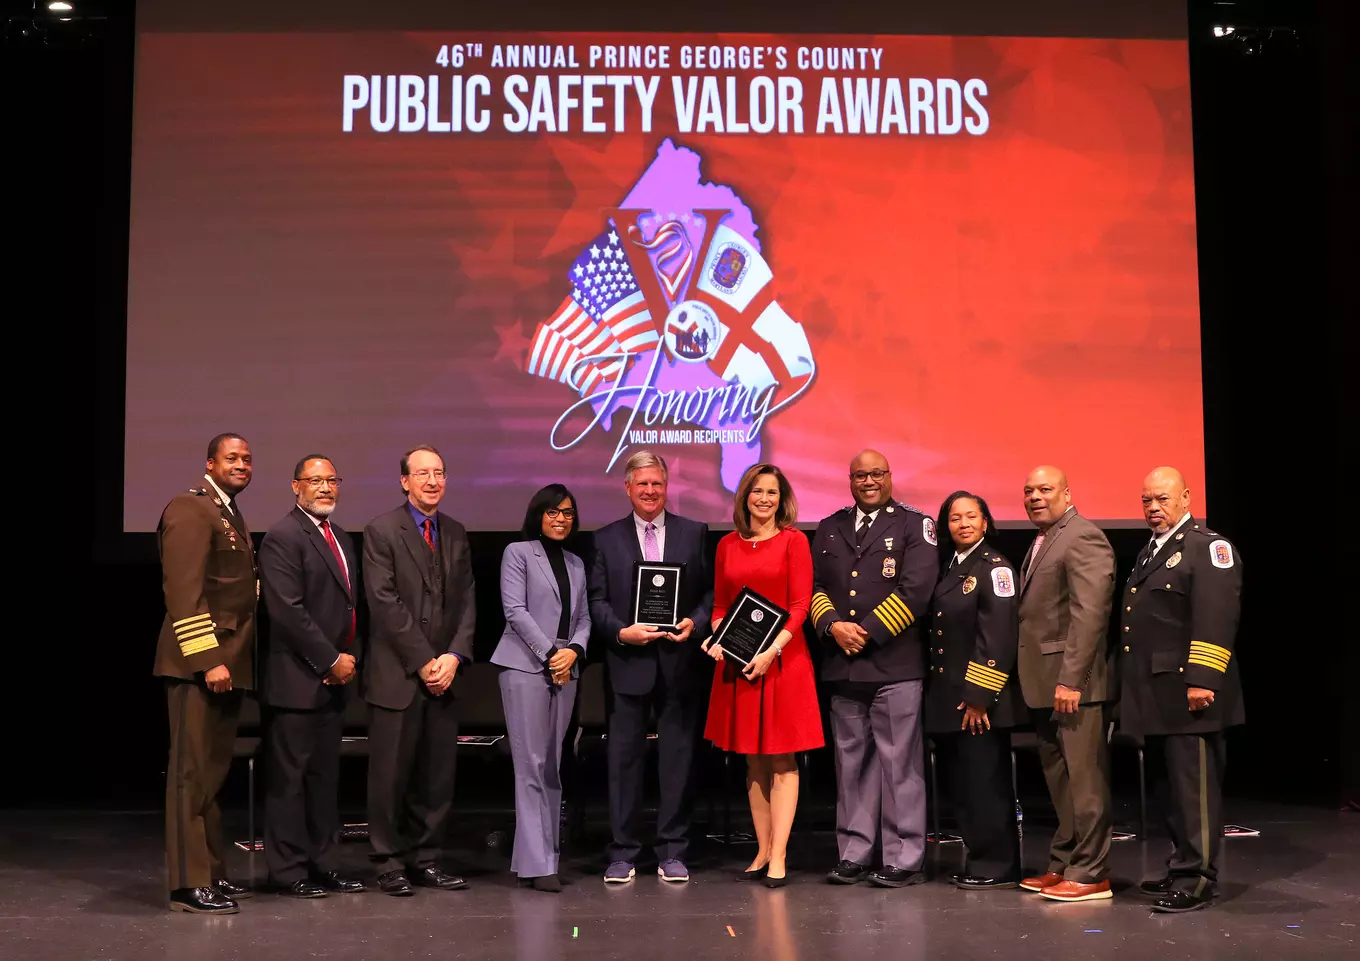 46th Annual Prince George's County Public Safety Valor Awards